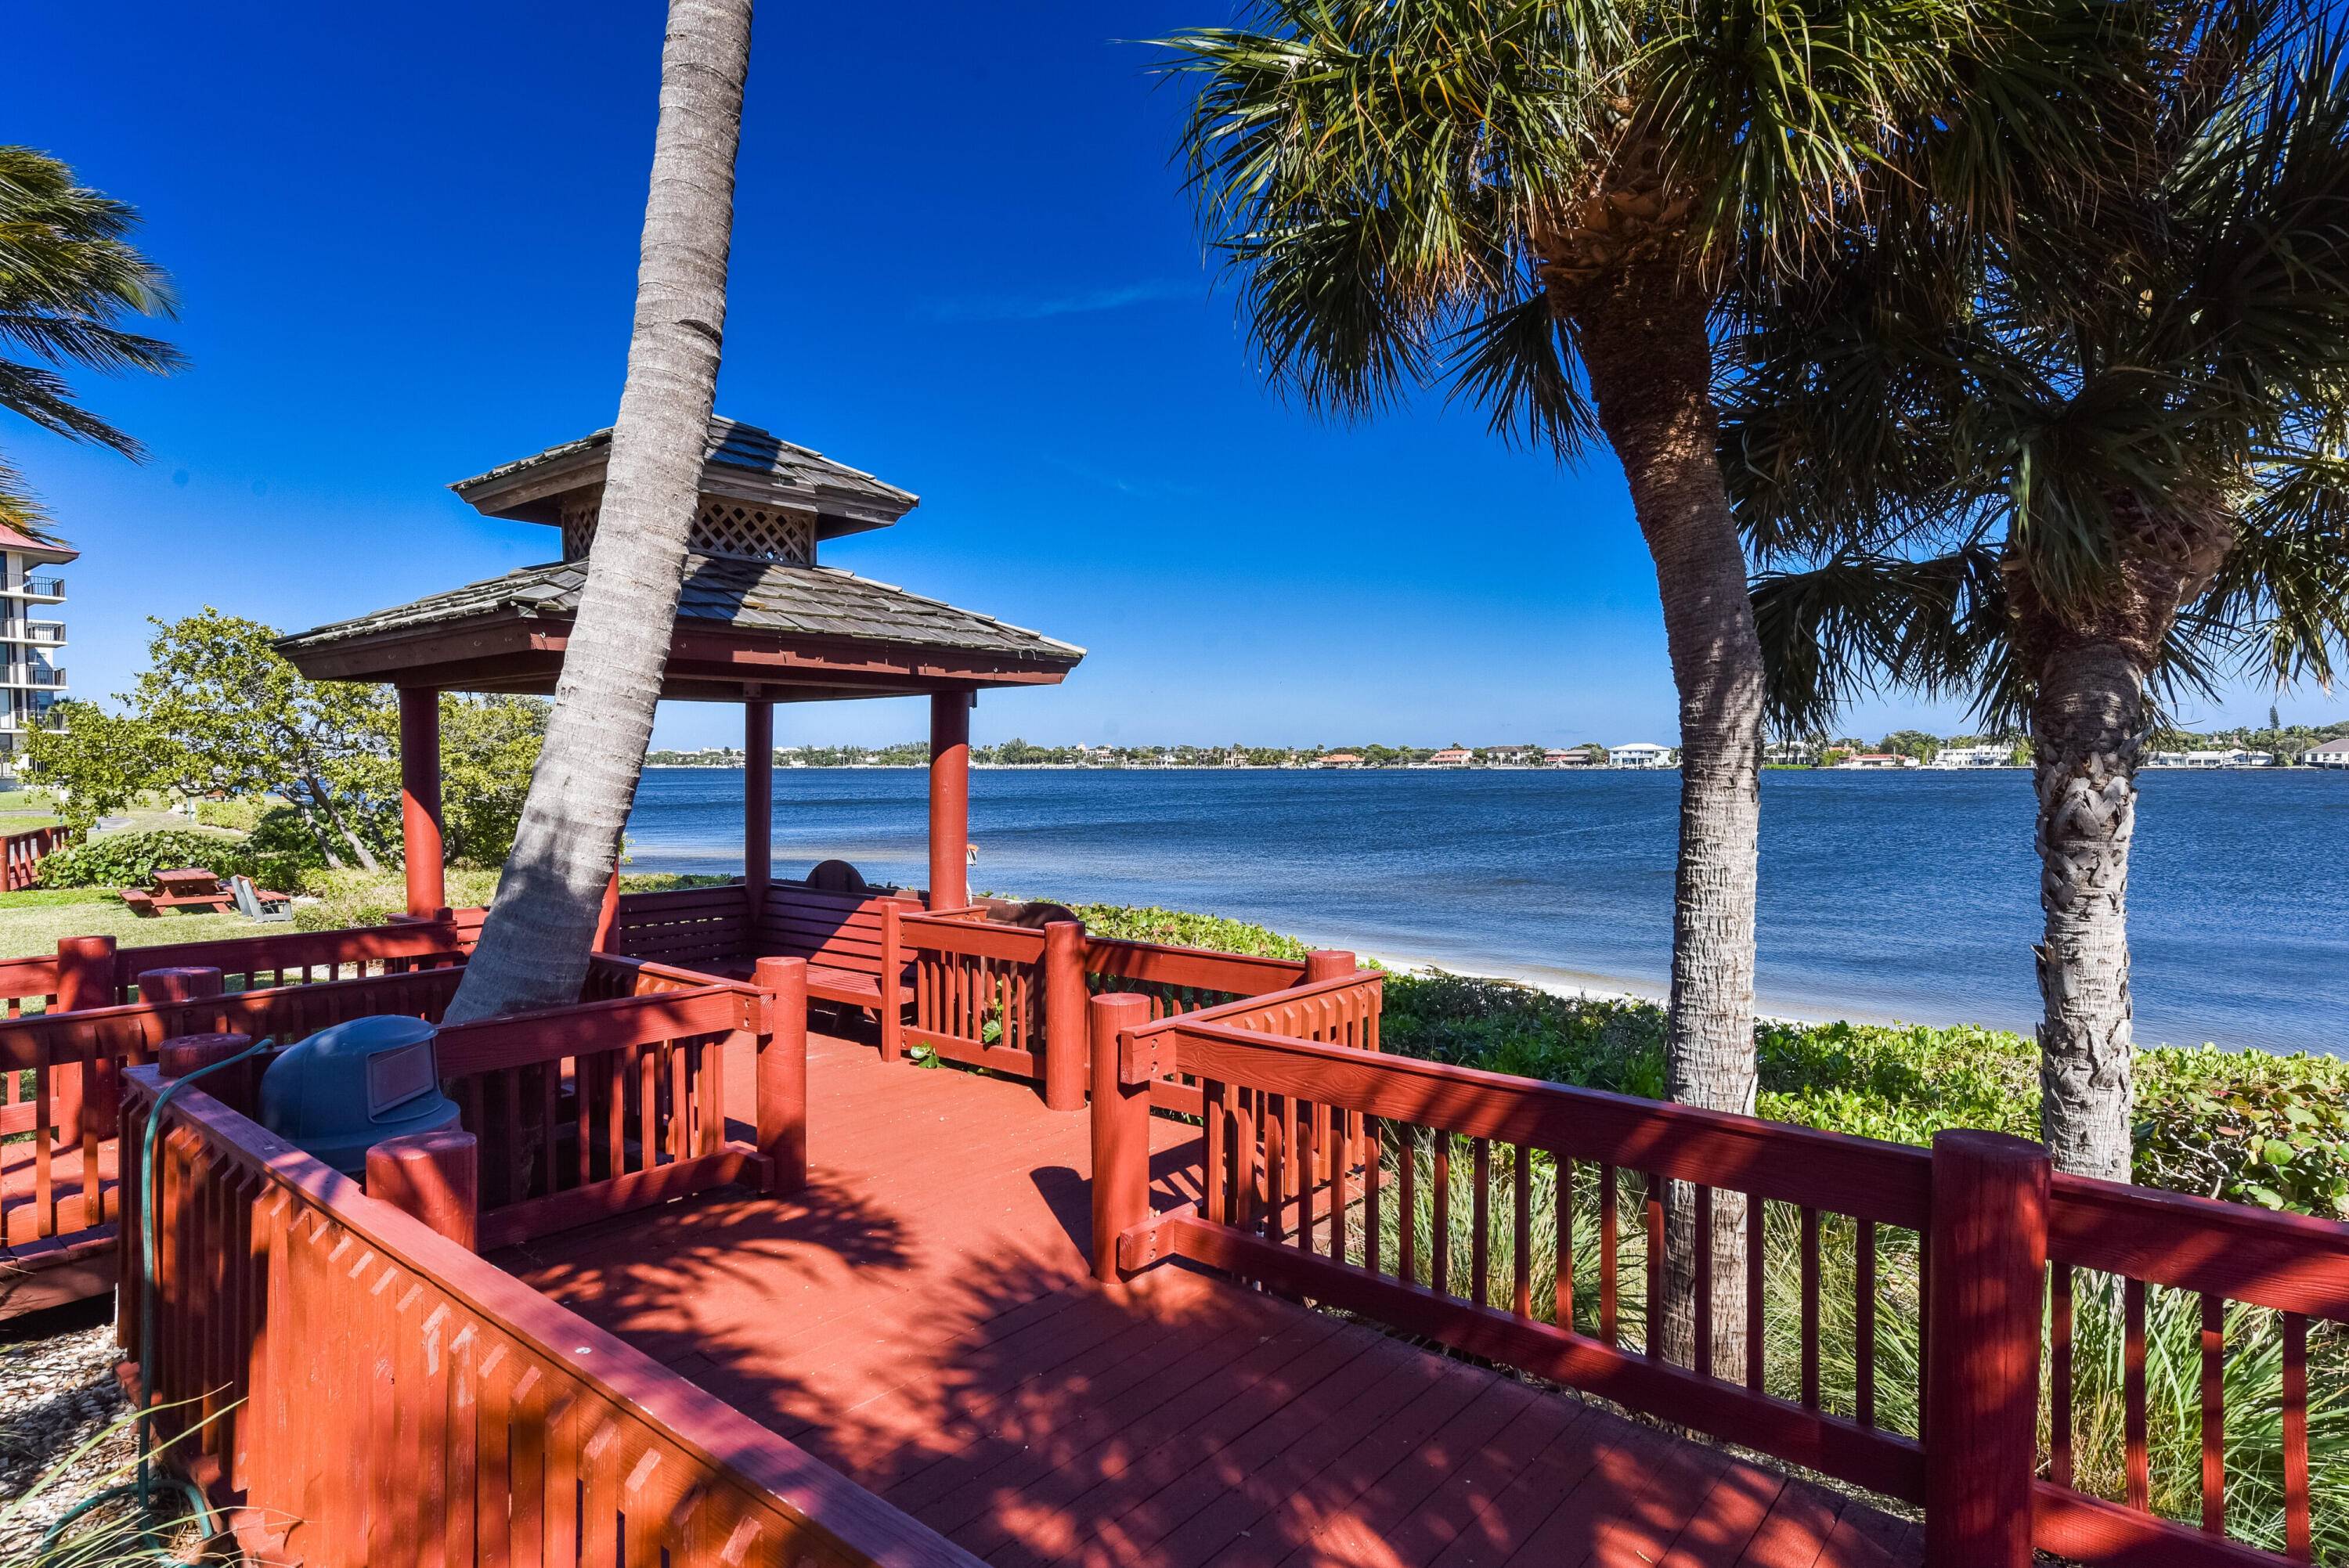 Nestled in a serene vibrant Intracoastal community, this spacious 2 bedroom, 2 bathroom condo offers the perfect blend of comfort, style, resort like living.